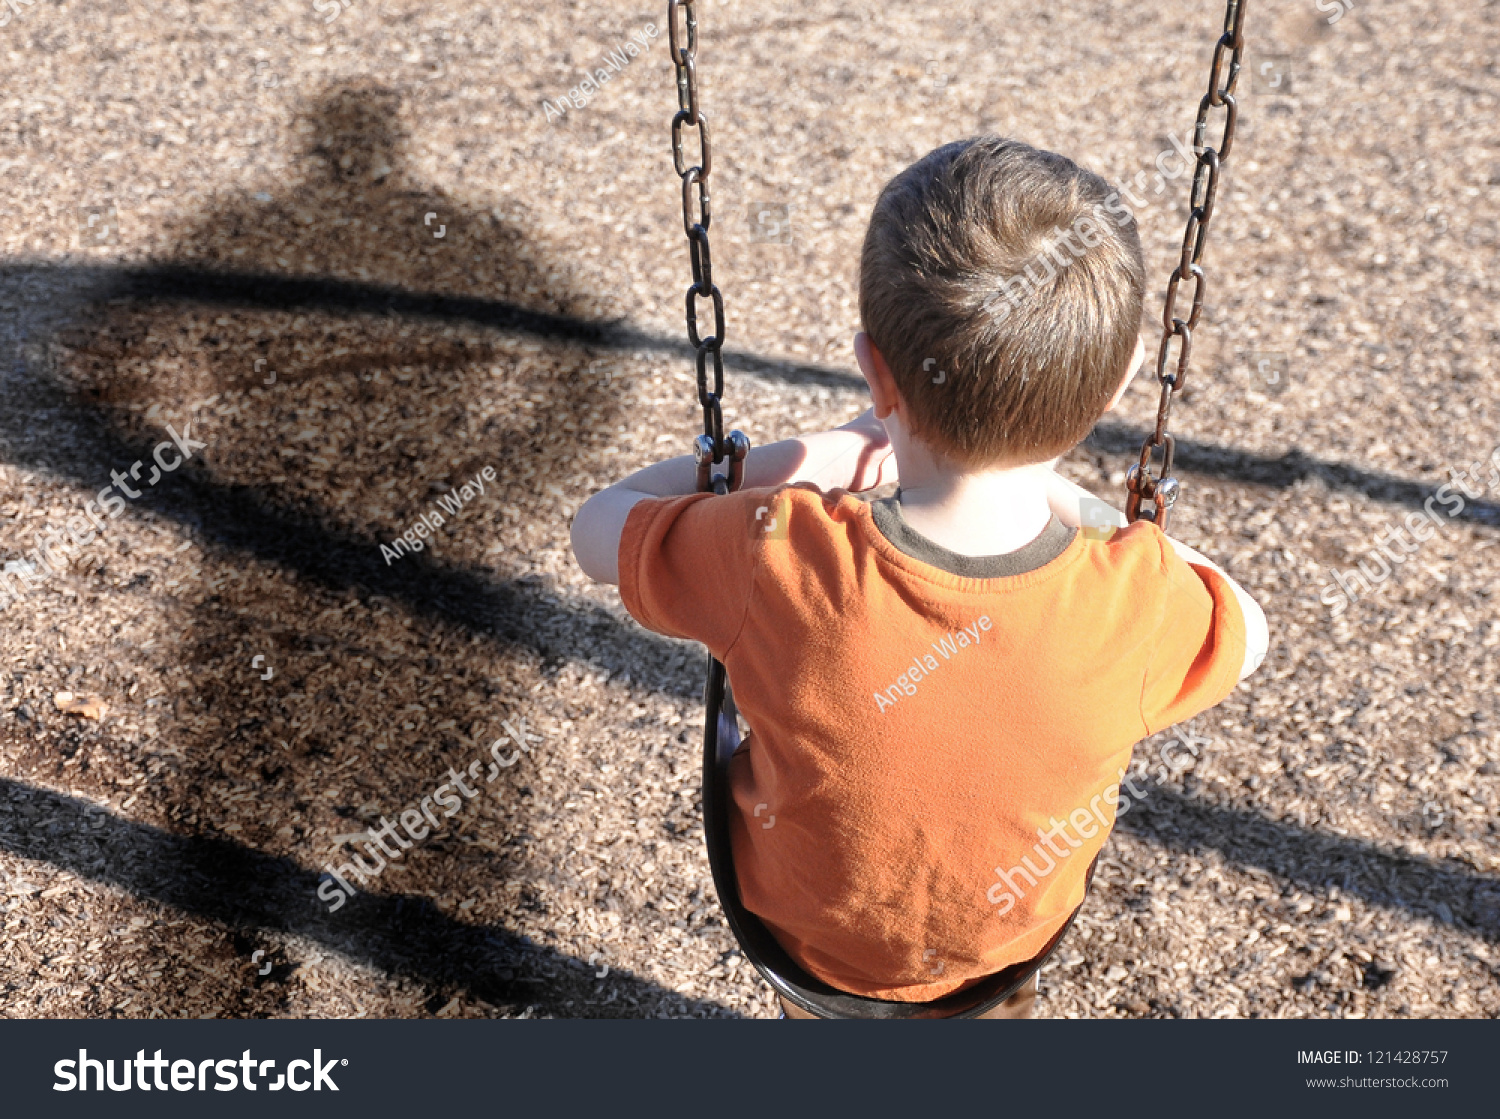 A young boy is sitting on a swing set and looking at a shadow figure of a man or bully at a playground. Use it for a kidnap, defense or safety concept. #121428757